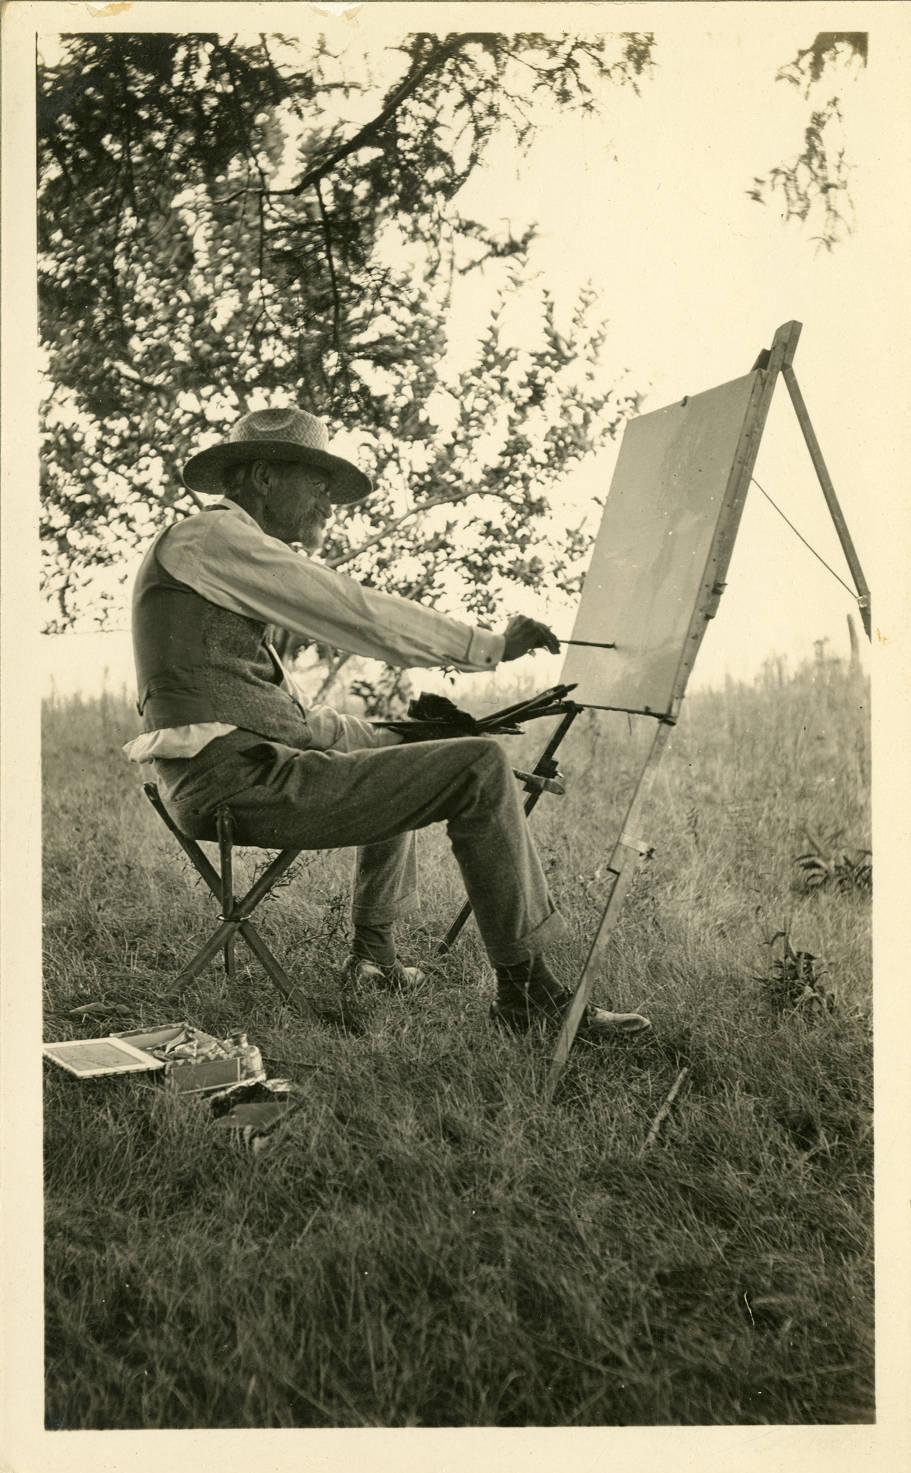 A man is sitting in a chair in the middle of an open field. He is painting on a canvas set up on an easel. 